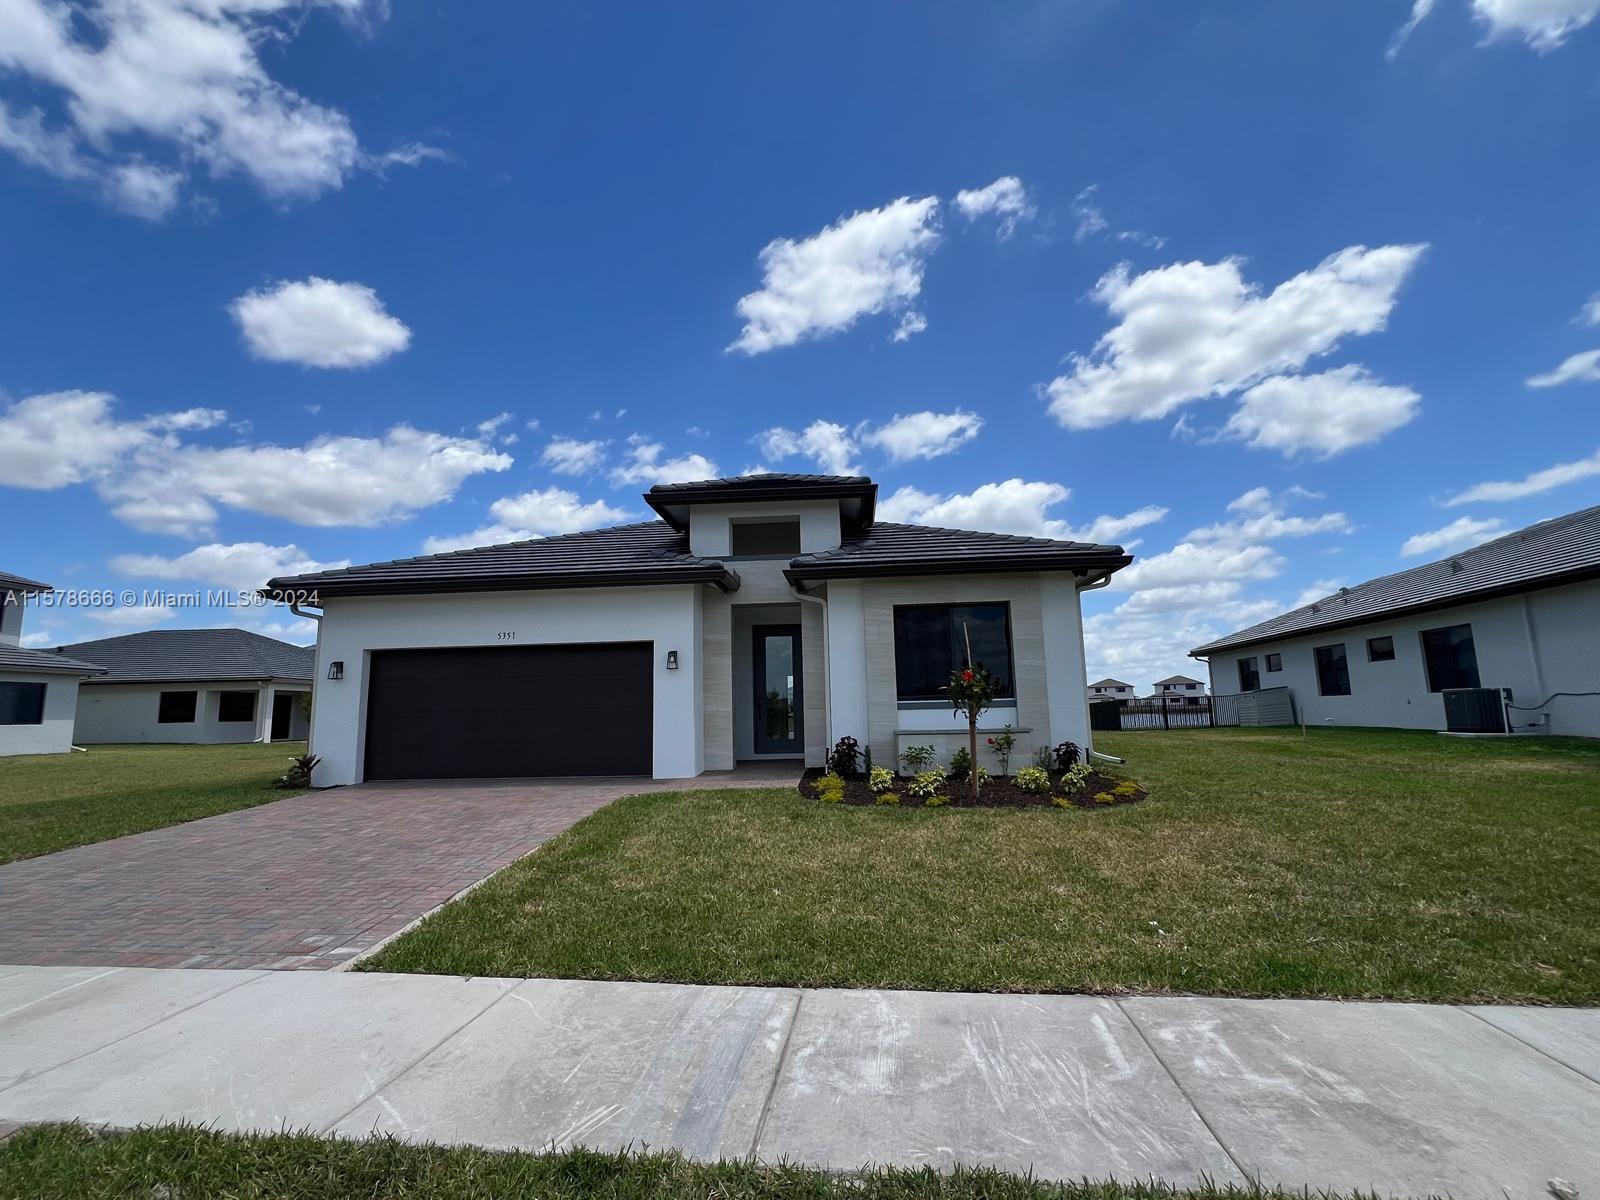 Photo of 5351 Nevola Ave in Ave Maria, FL